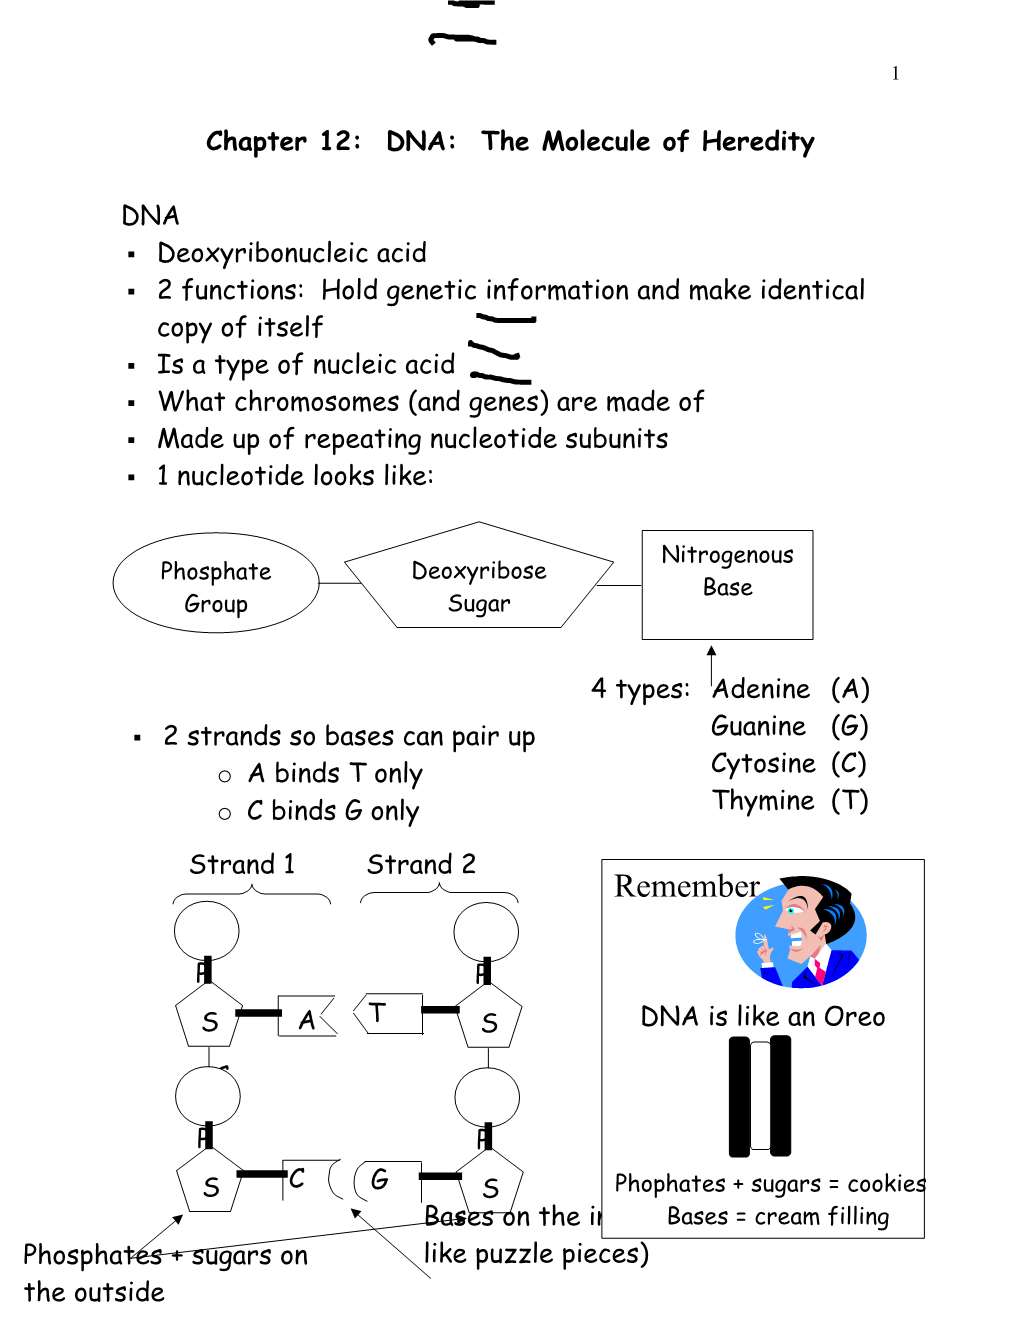 Chapter 11: DNA: the Molecule of Heredity s1